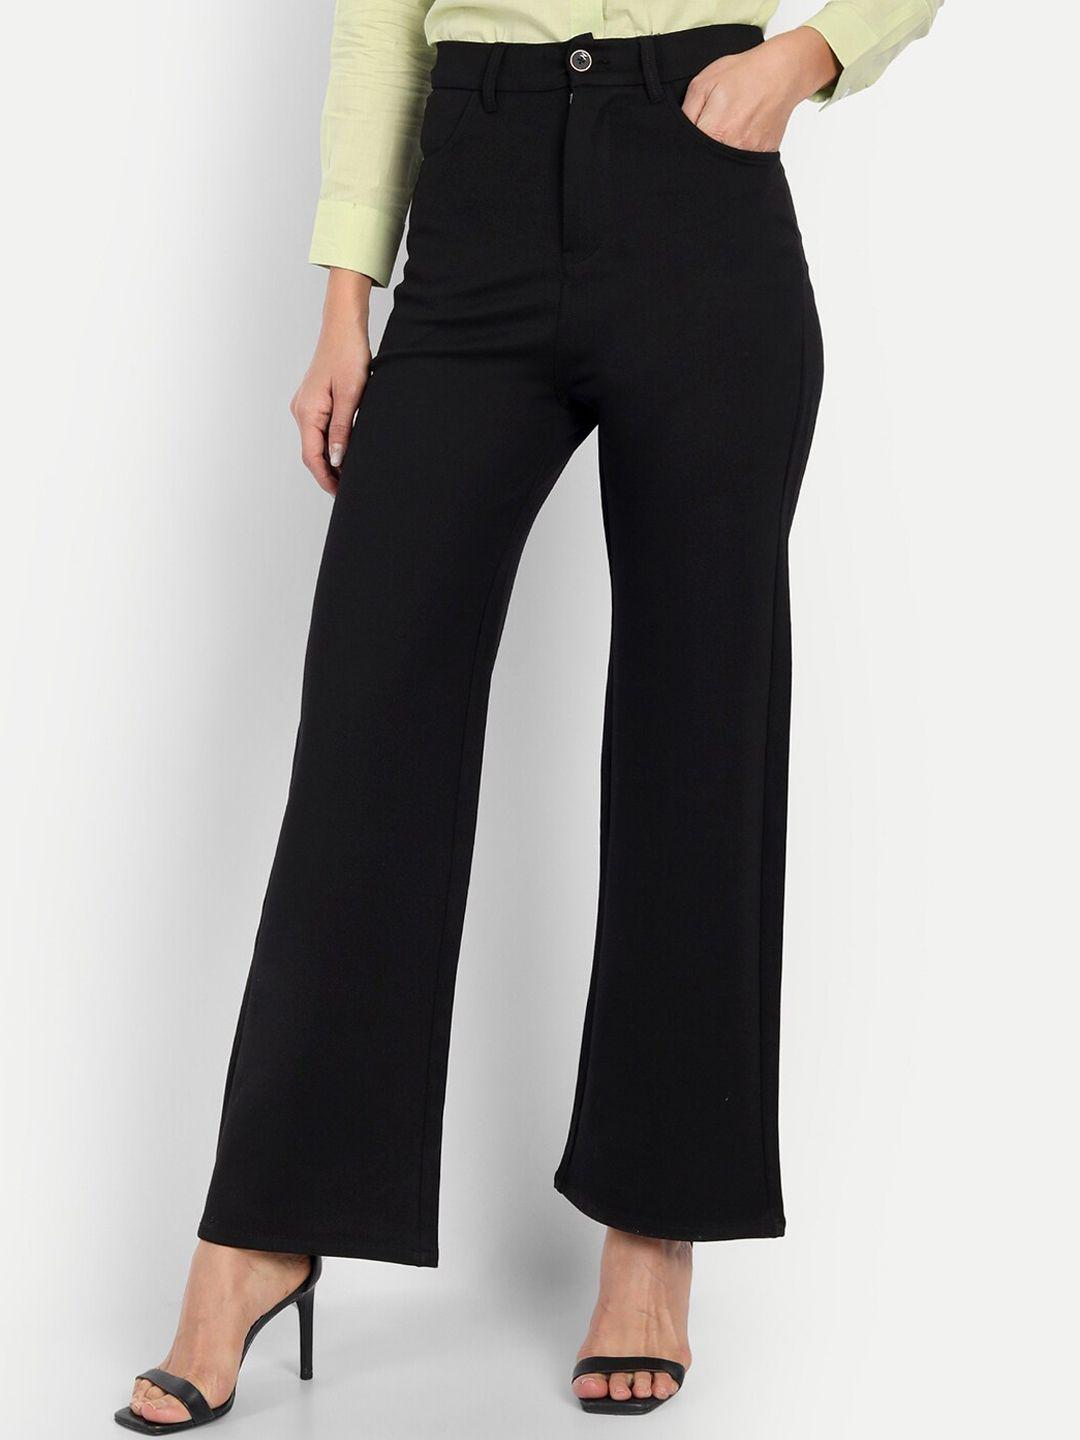 next-one-women-solid-loose-fit-high-rise-parallel-trousers